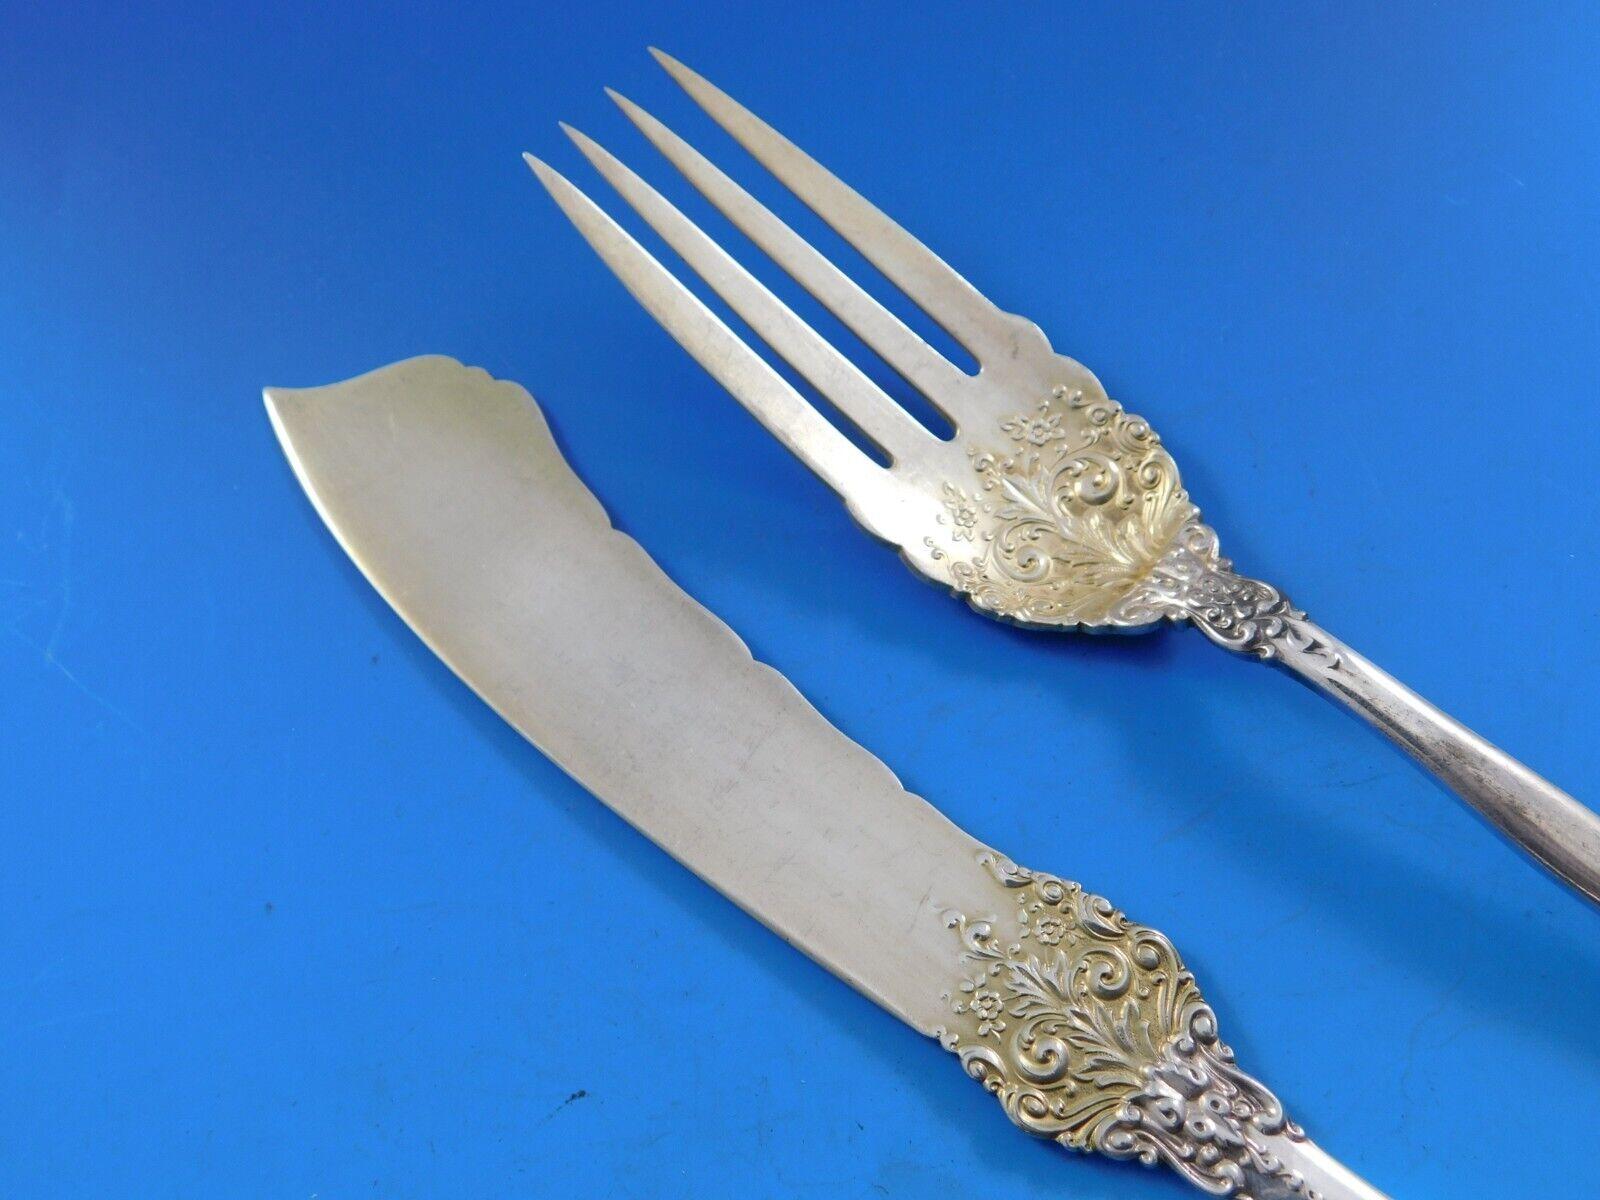 Rare Revere by International c1898 Sterling Silver Fish set - 24 pieces. This fish set includes:

12 Individual Fish Knives, flat handle all-sterling, with light gold-wash on blades, 7 7/8